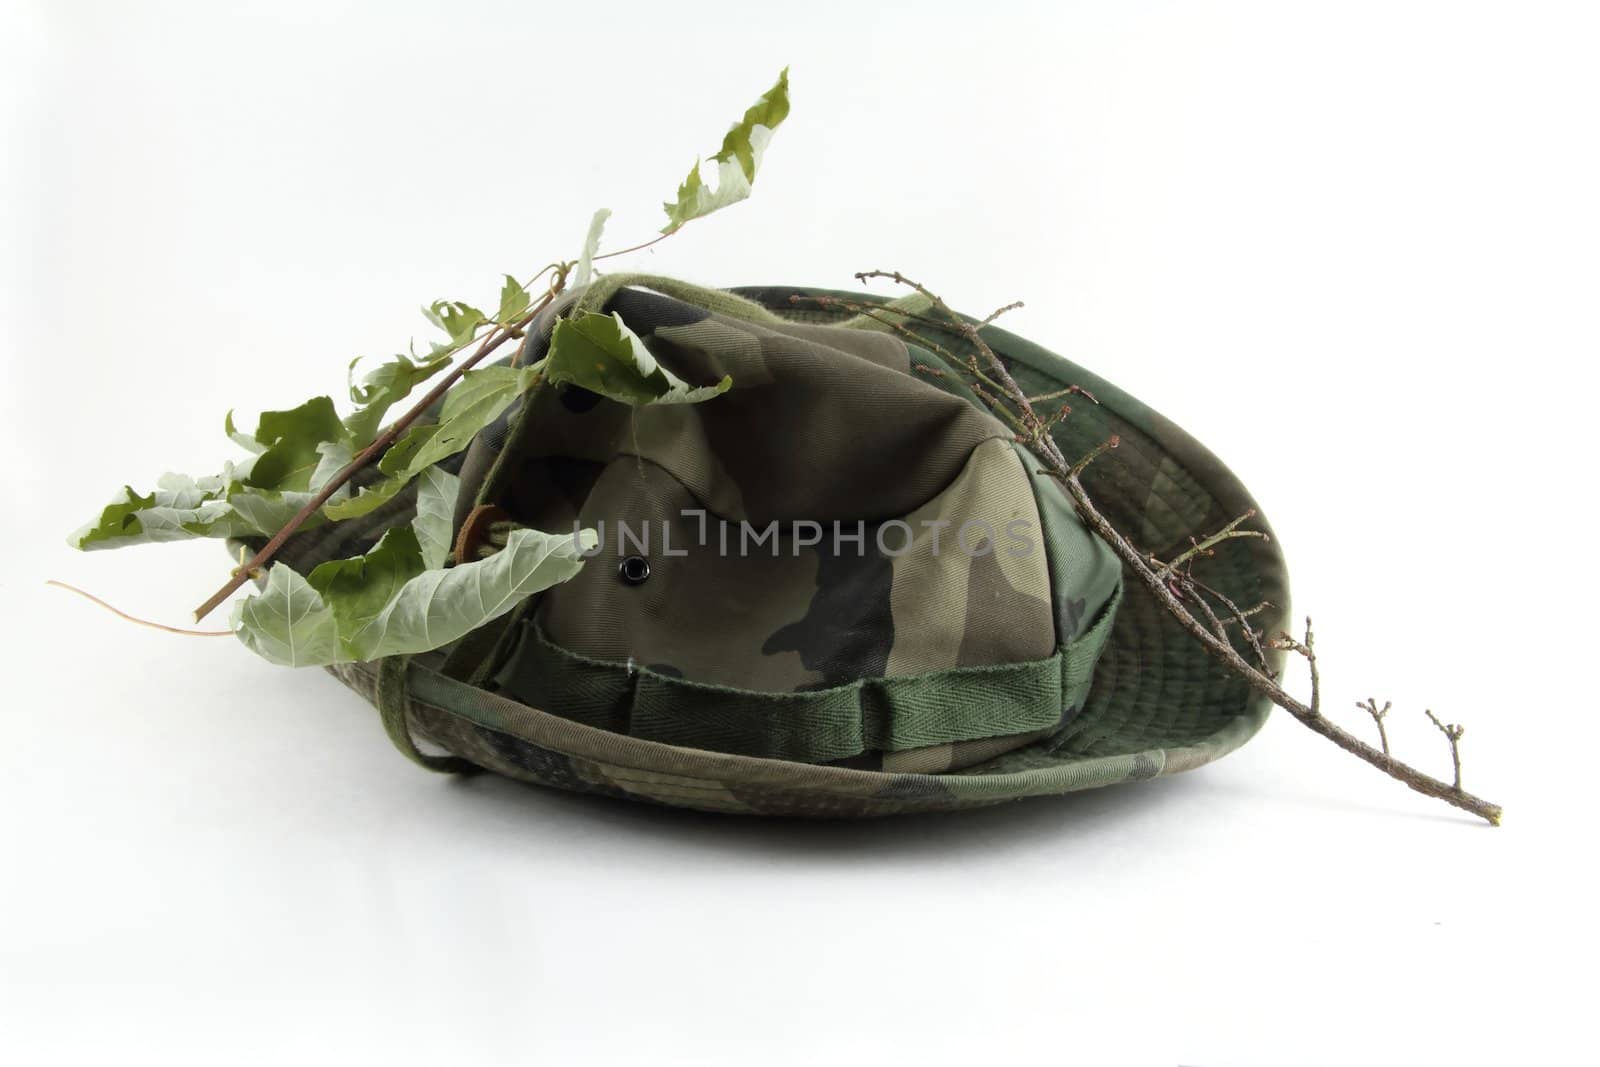 Camouflage hat with leaves by jasony00